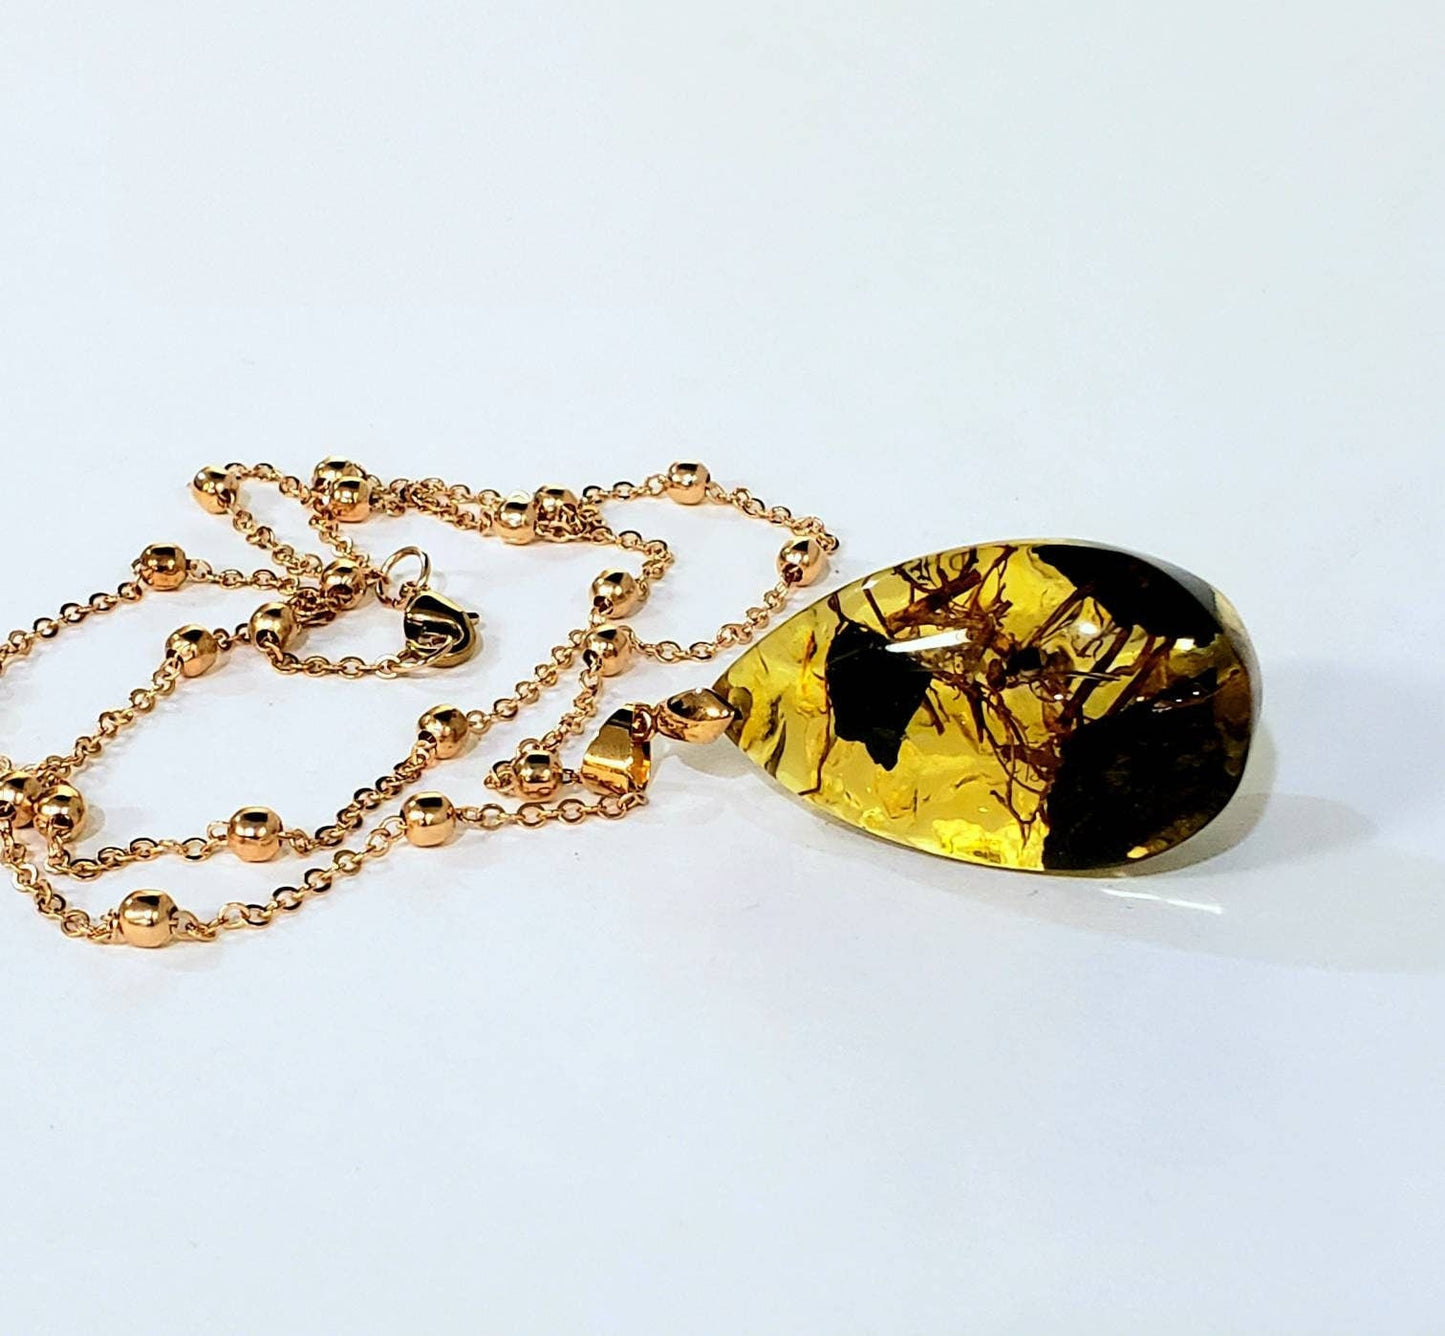 Honey yellow resin faux Amber,inside matrix large teardrop pendant with gold plated 22&quot; chain necklace for Man and Woman gift.